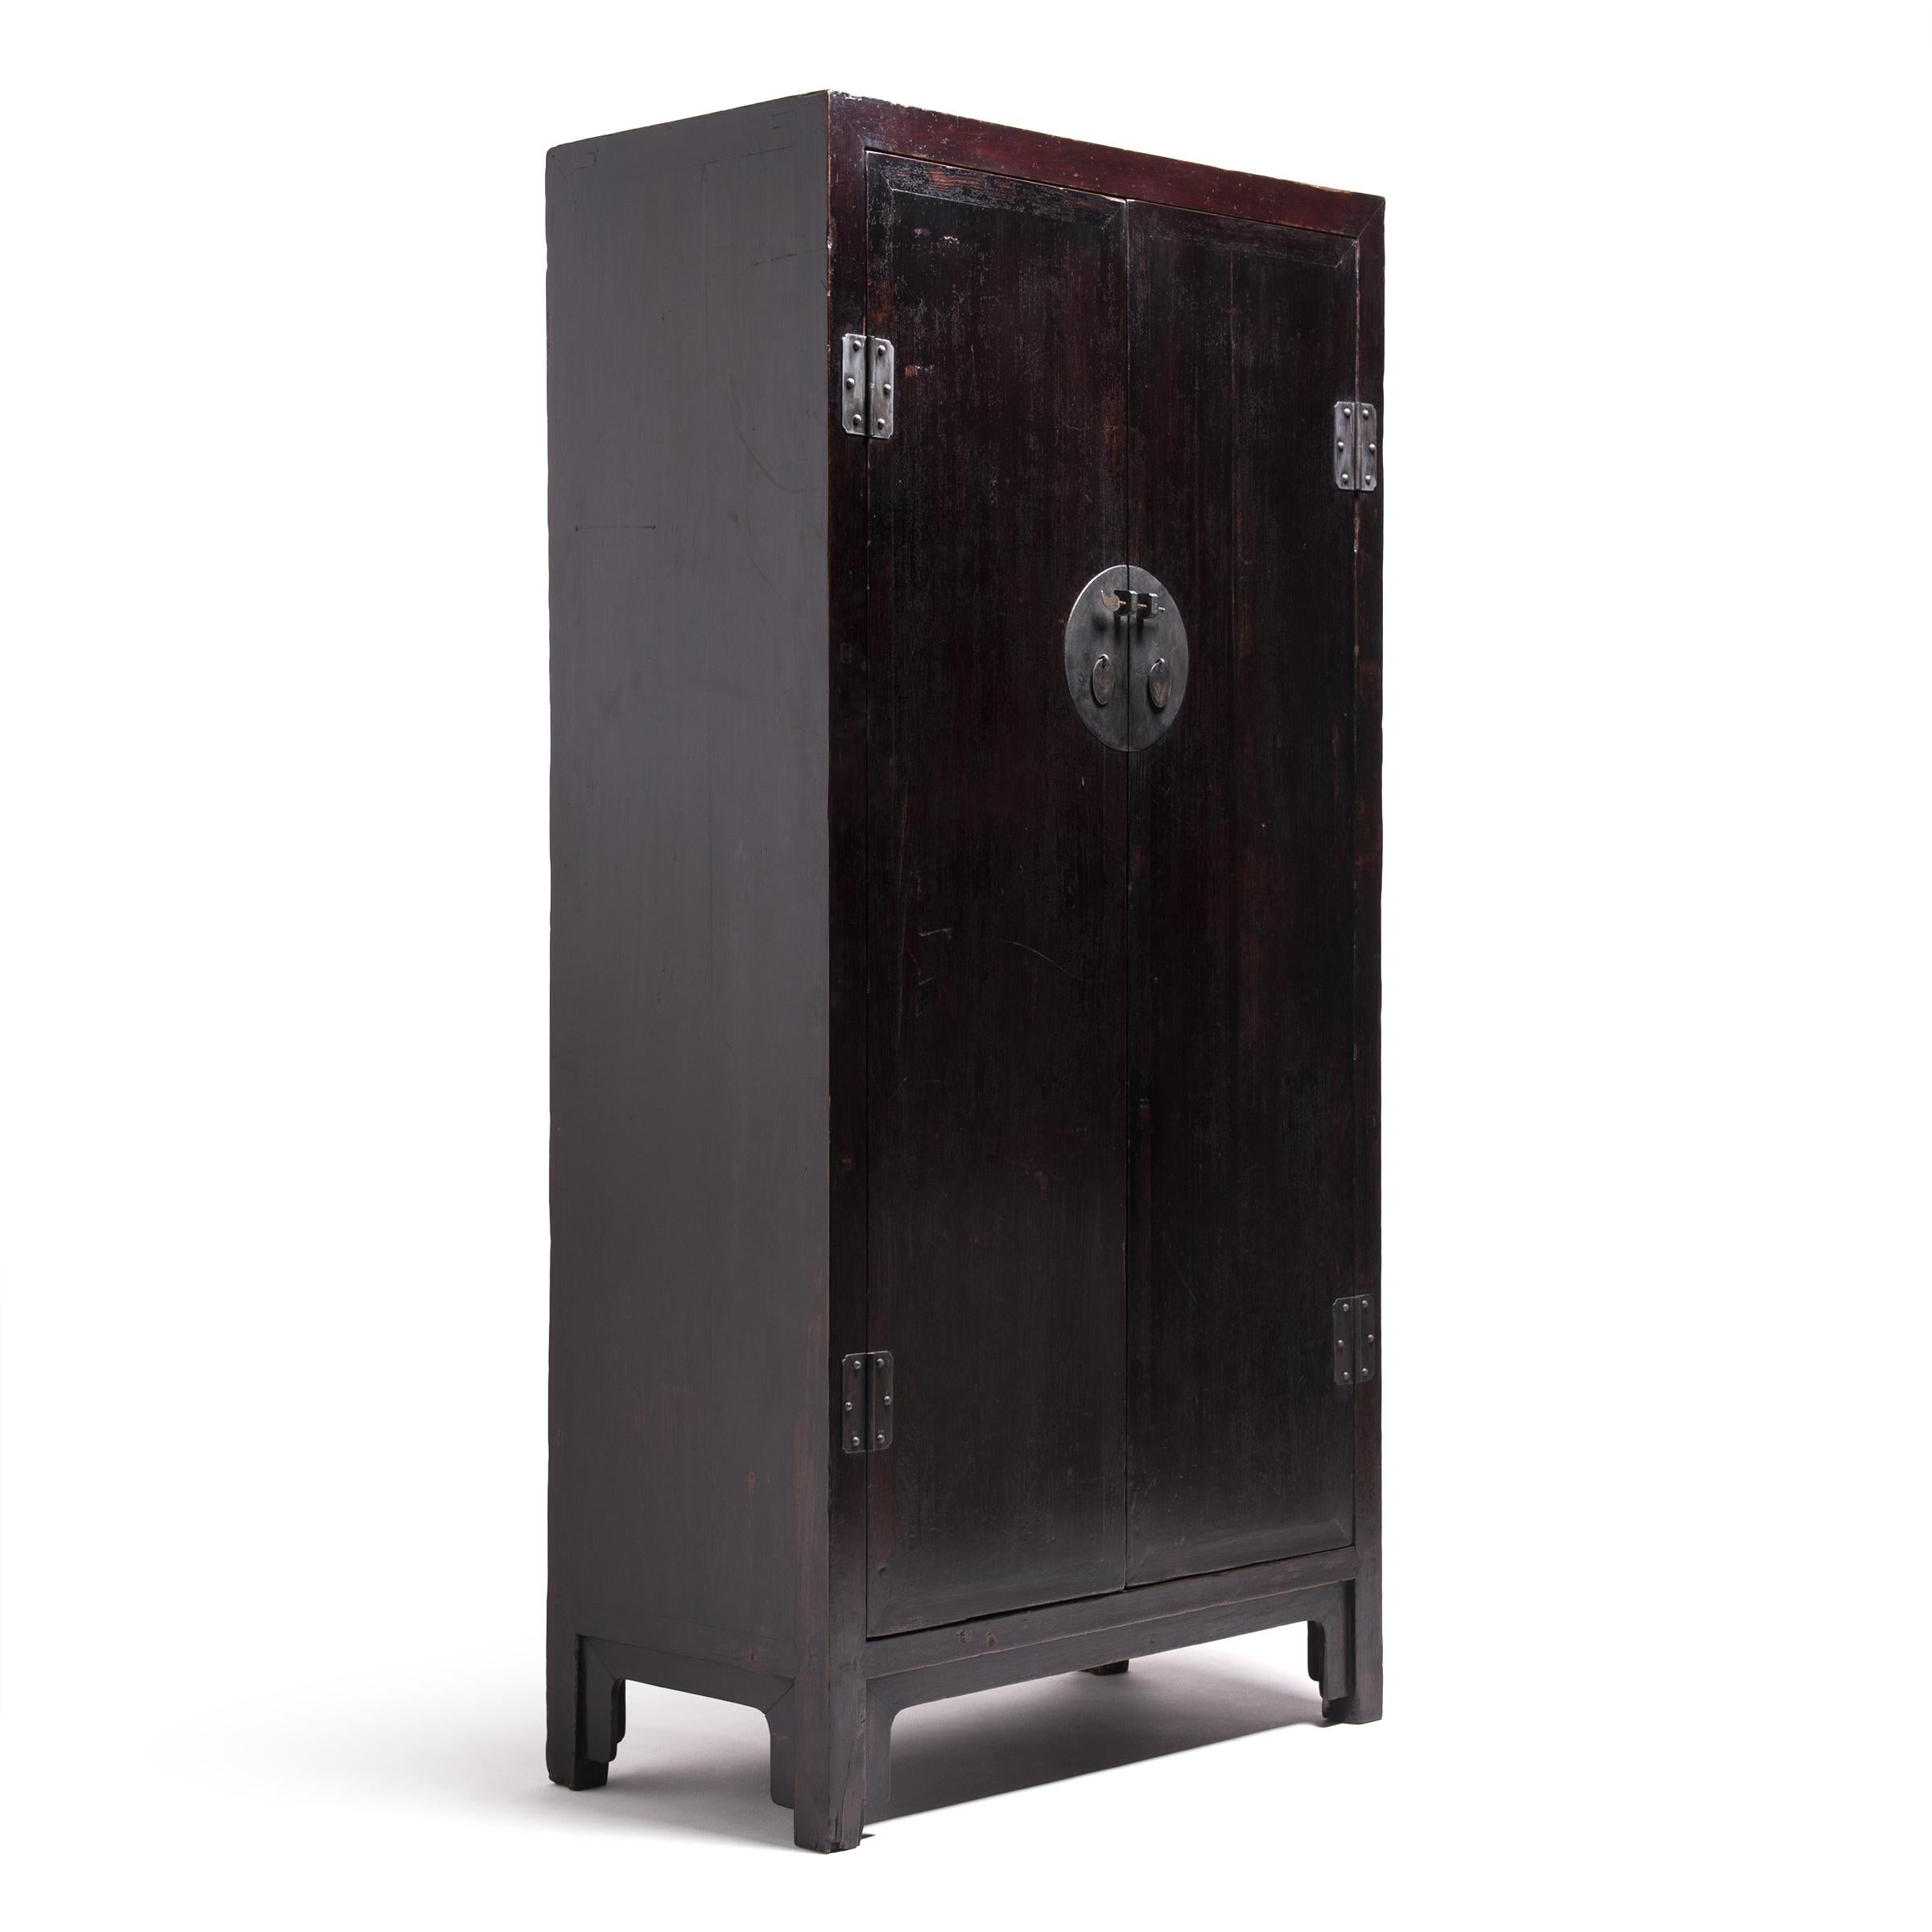 Unusual riveted hinge plates and a full-moon sliding door latch made of solid brass lend texture and metallic contrast to this simply styled, tall elm cabinet. In its exacting proportions, and masterful mortise-and-tenon construction, this